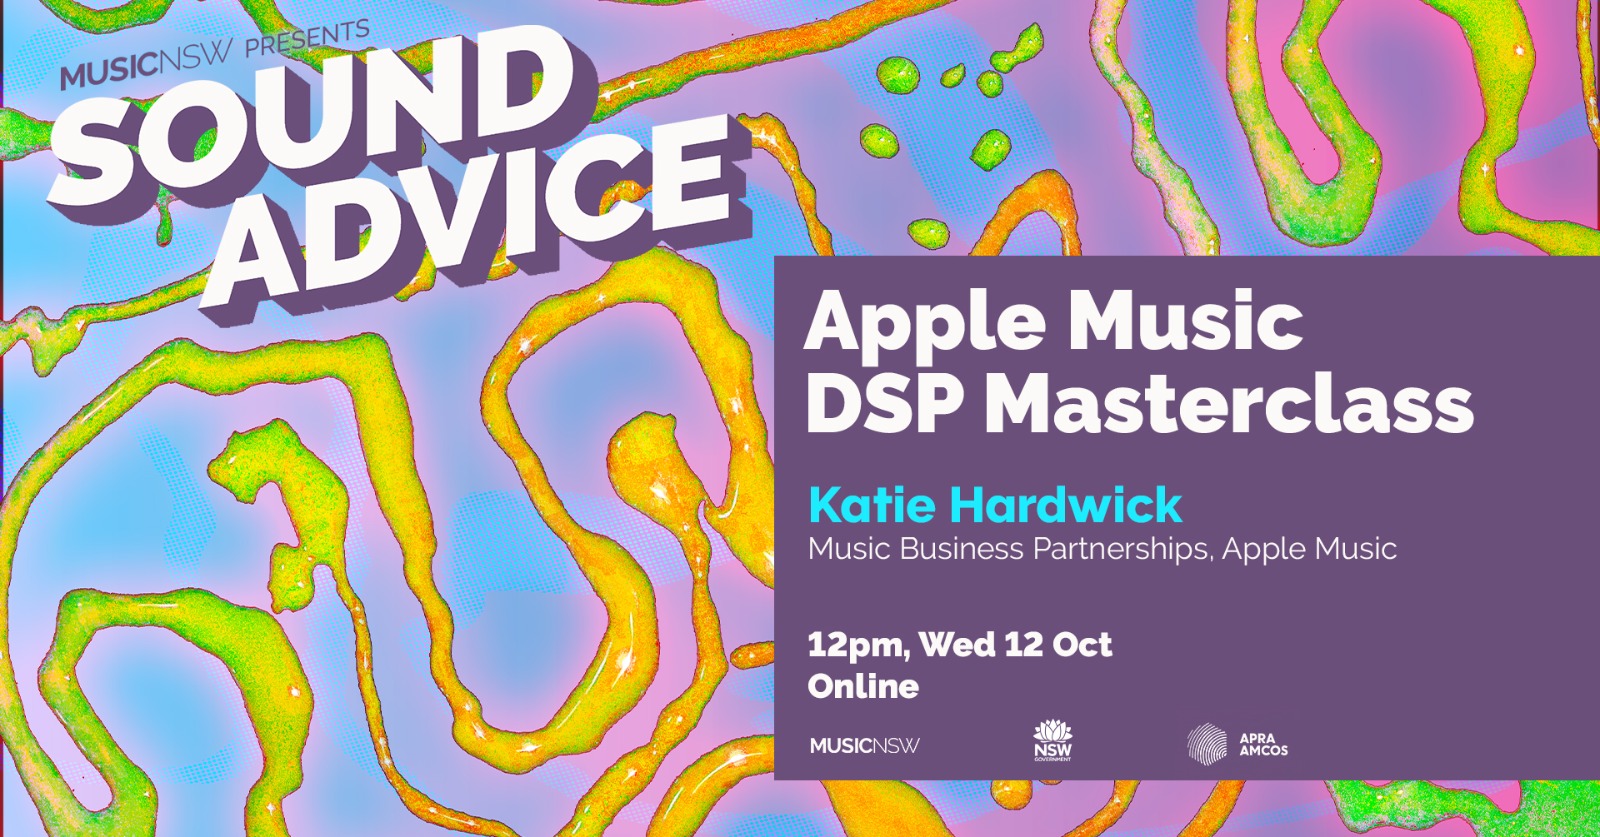 Sound Advice Banner for Apple Music DSP event. Event details on a purple background all on a colourful swirling background.